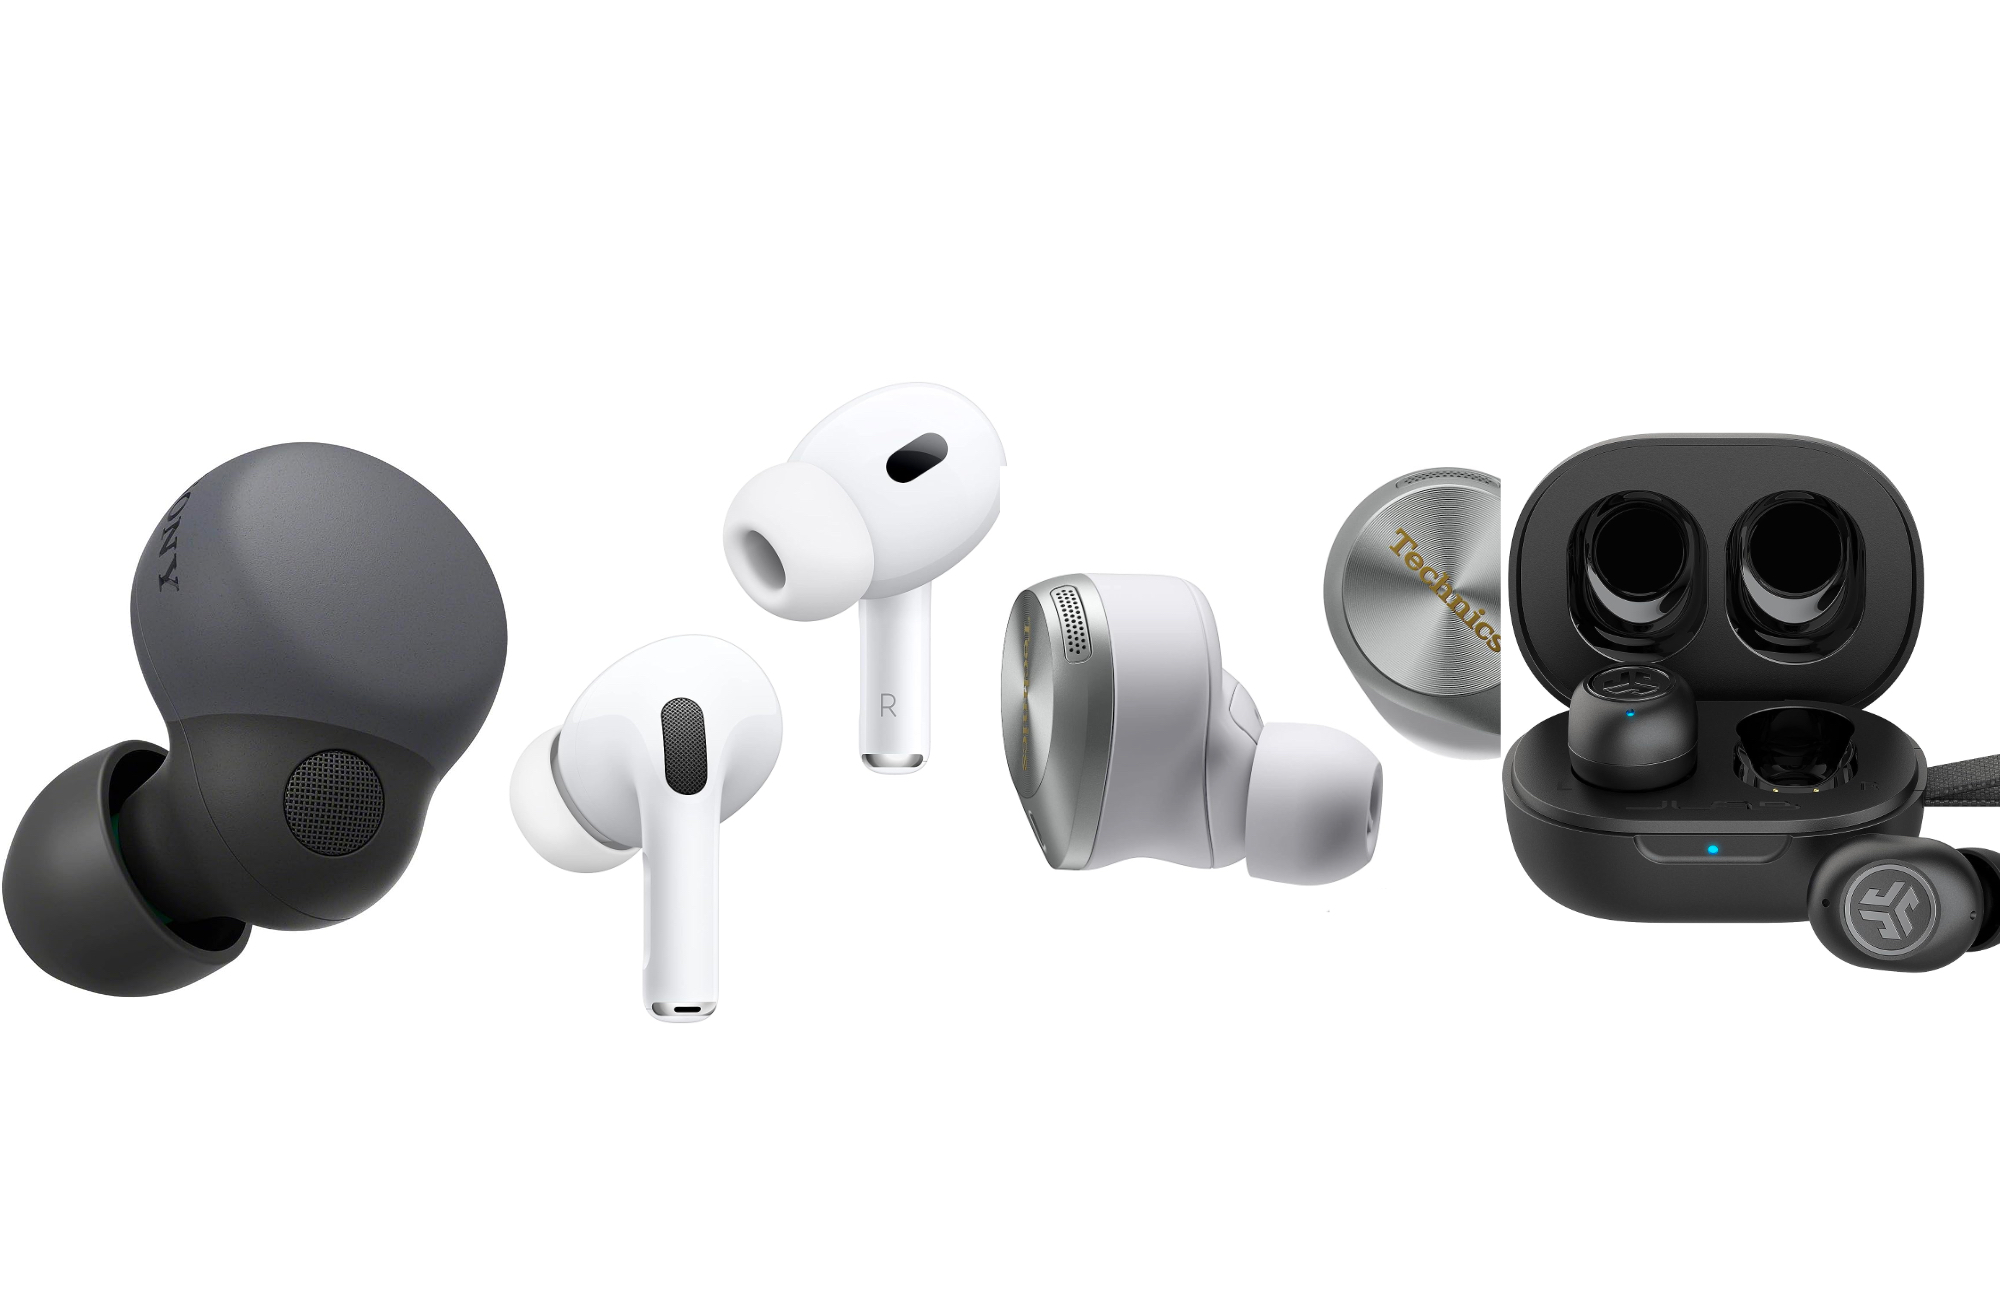 NEW Apple USB-C EarPods Tested on Various Devices - Samsung